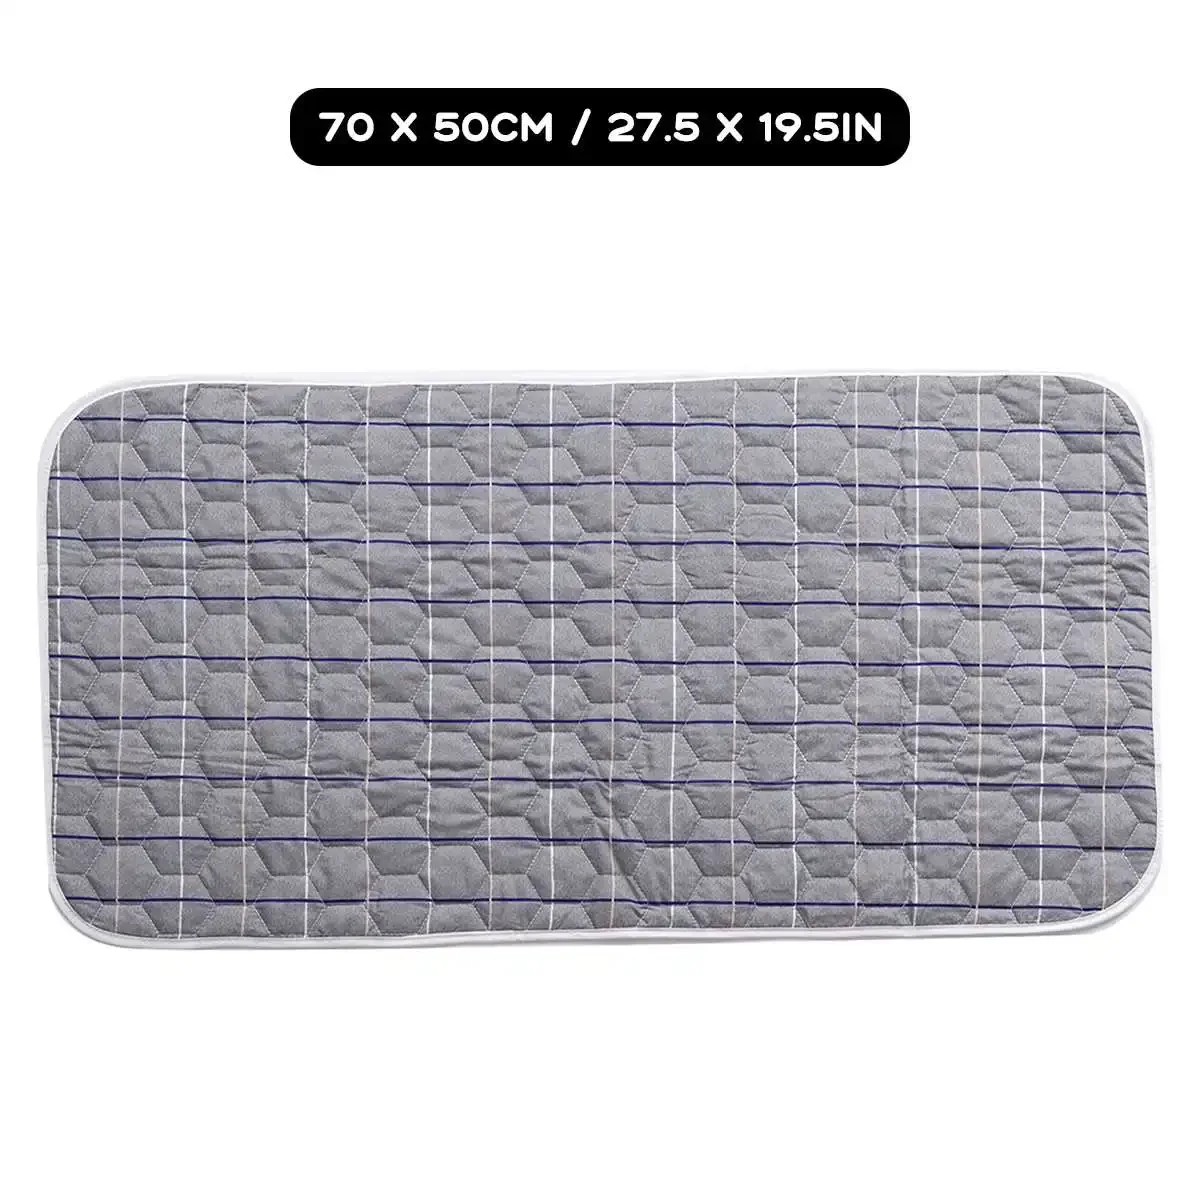 Waterproof 100% Cotton Mat Cover 32 x 19.5 in